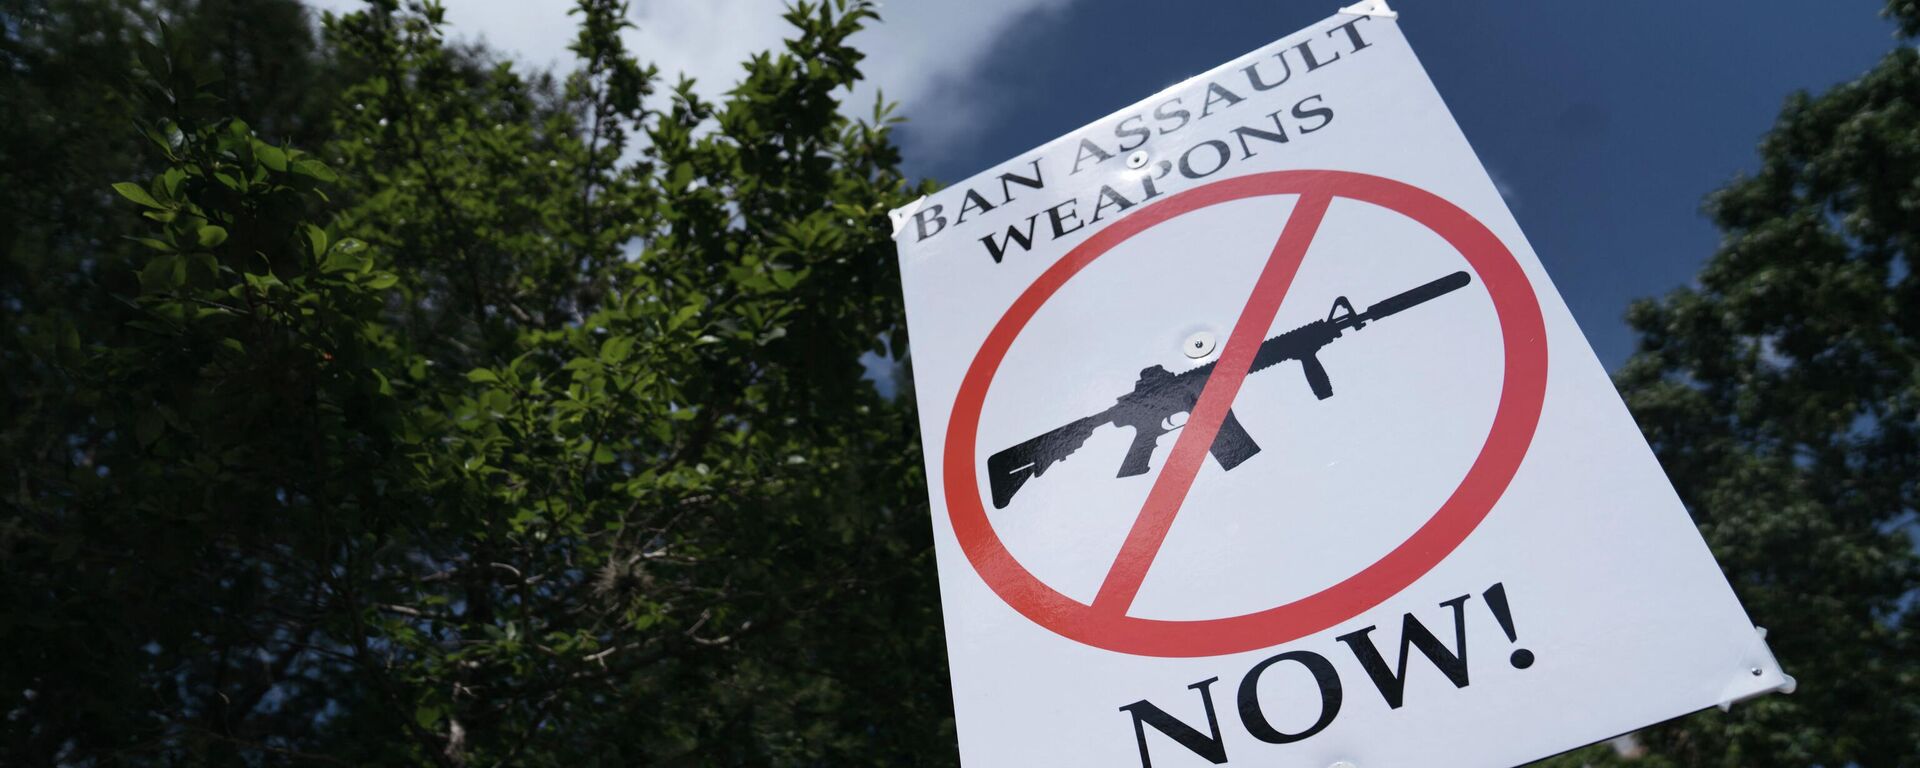 HOUSTON, TX - MAY 27: A gun control advocate holds a sign during a protest across from the National Rifle Association Annual Meeting at the George R. Brown Convention Center, on May 27, 2022 in Houston, Texas.  - Sputnik International, 1920, 22.06.2022